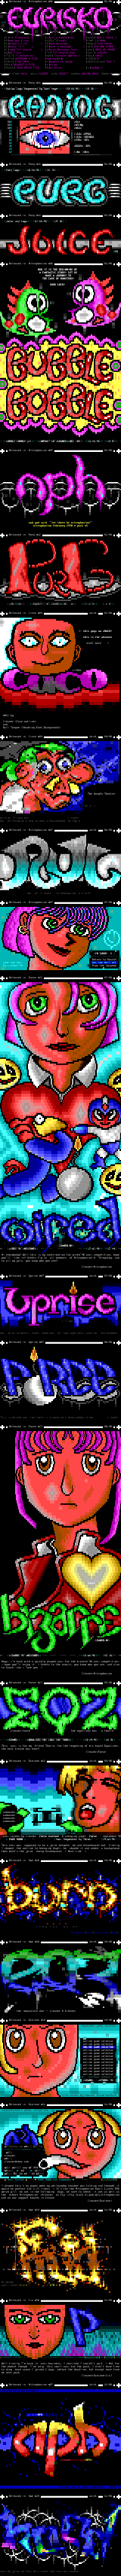 1998 Ansi Collection by Cleaner